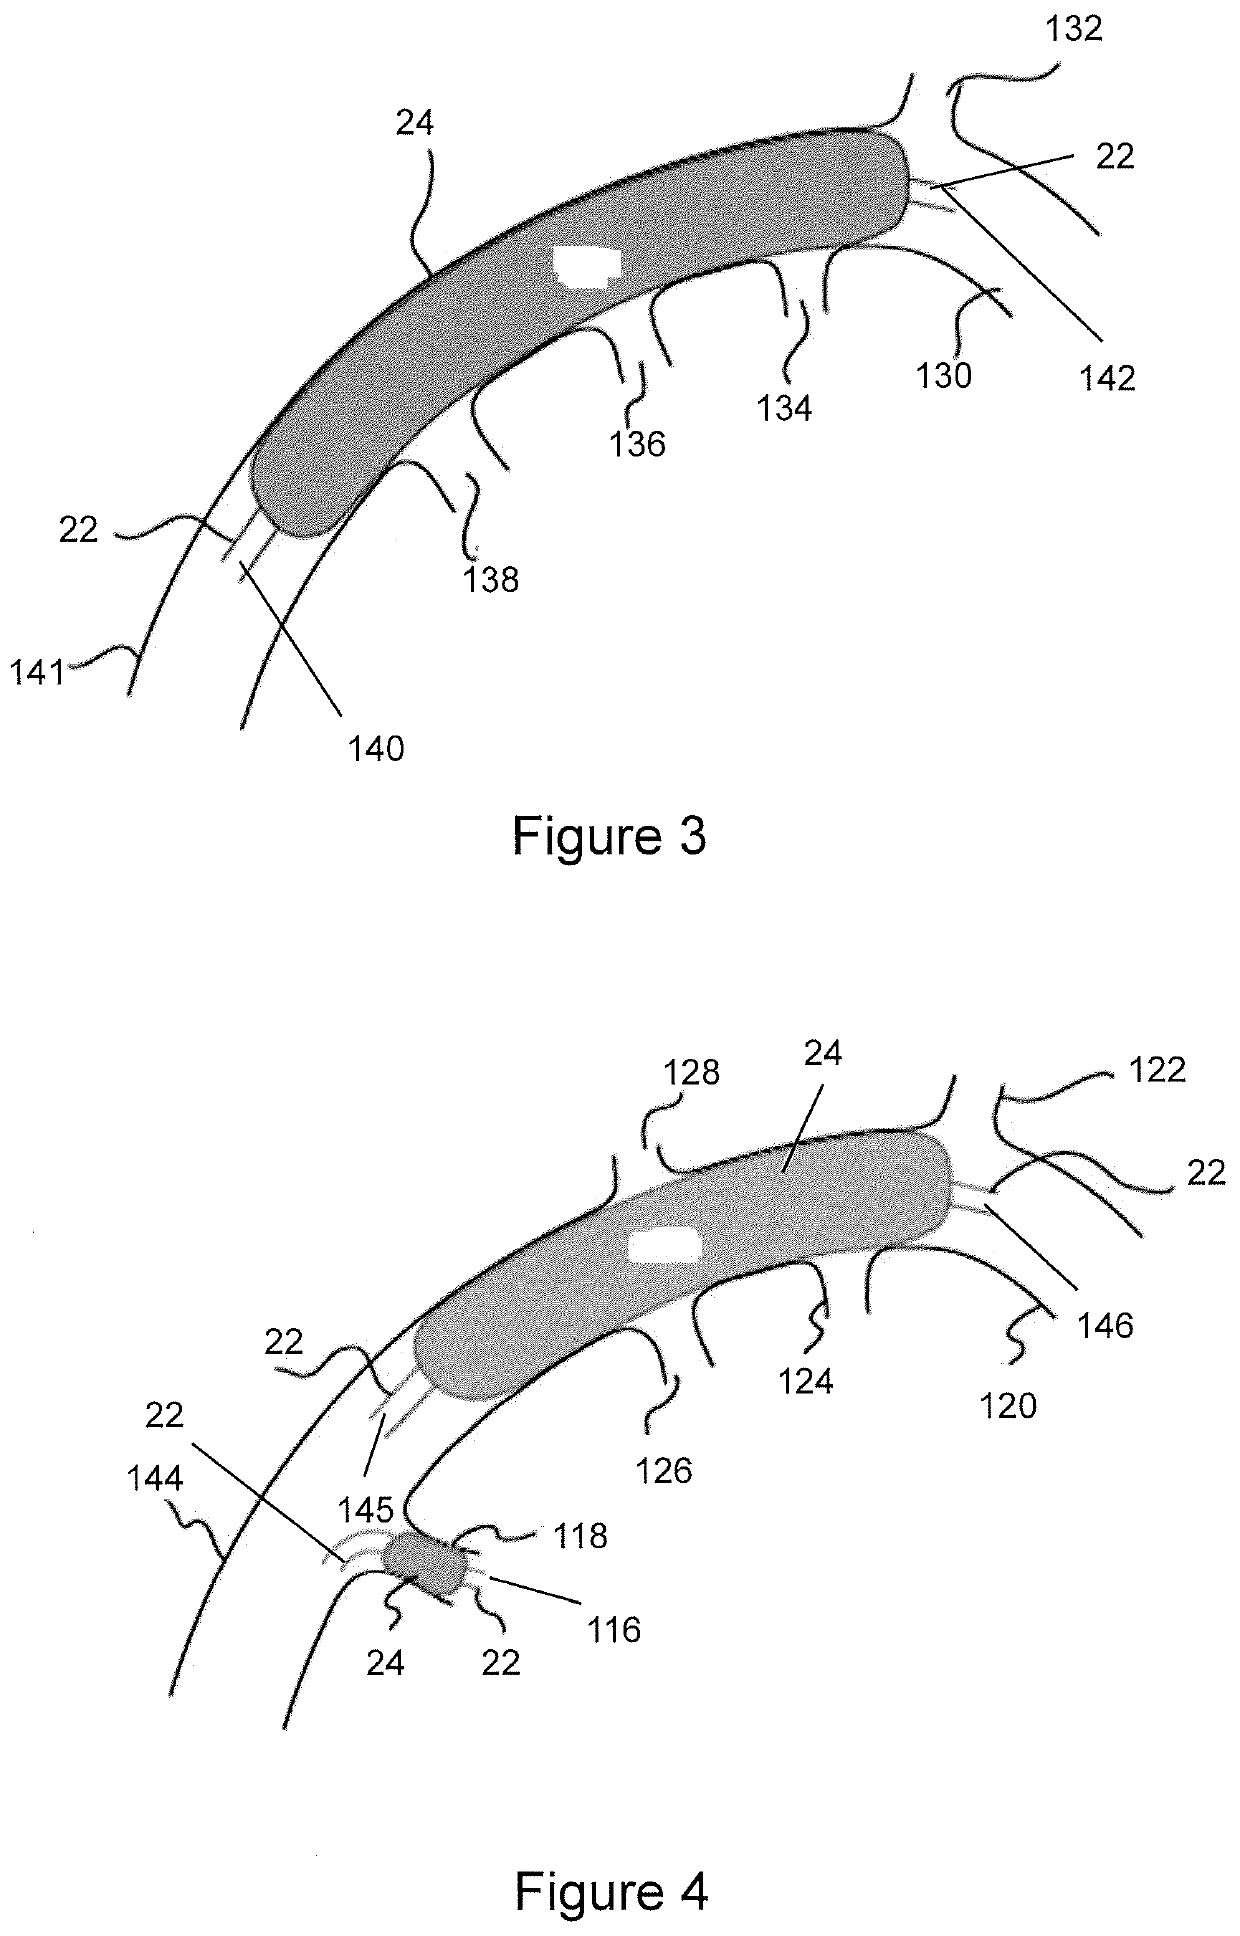 Devices and Methods for Vascular Hyperperfusion of Extravascular Space